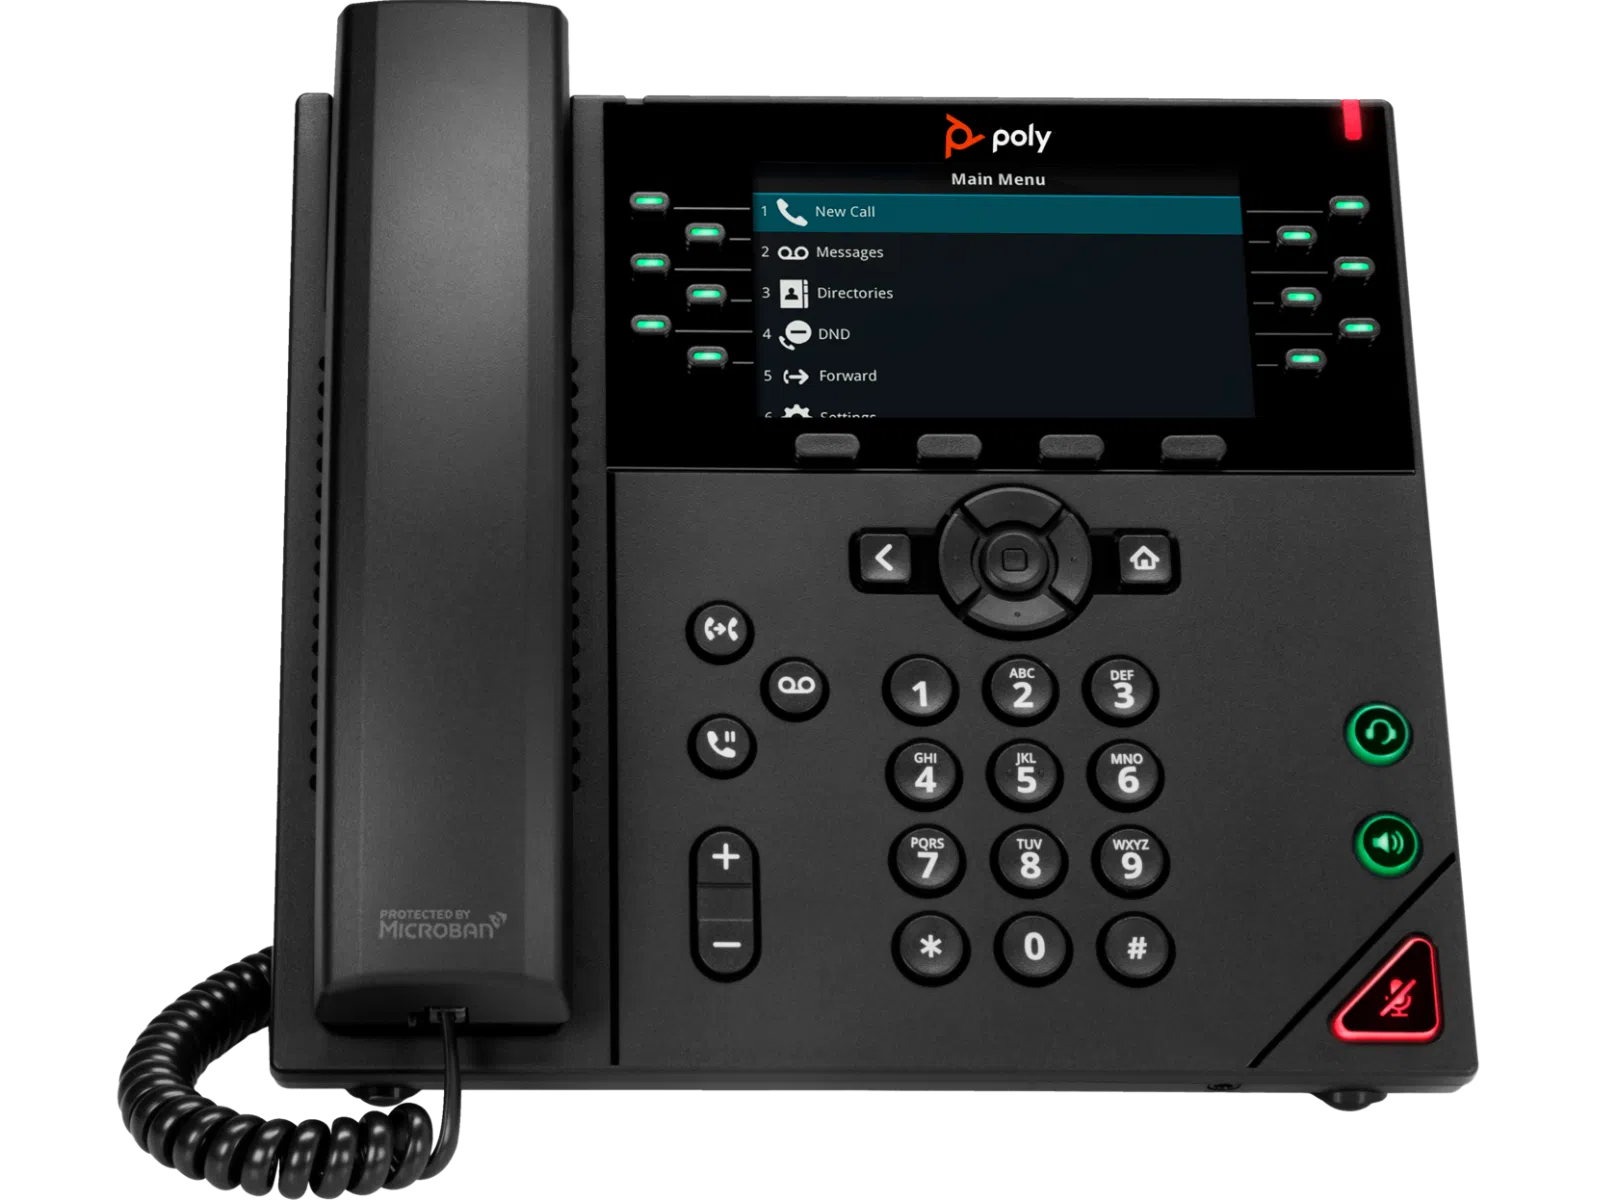 What is the color LCD resolution of the Poly VVX 450 12-Line High-end IP Phone?